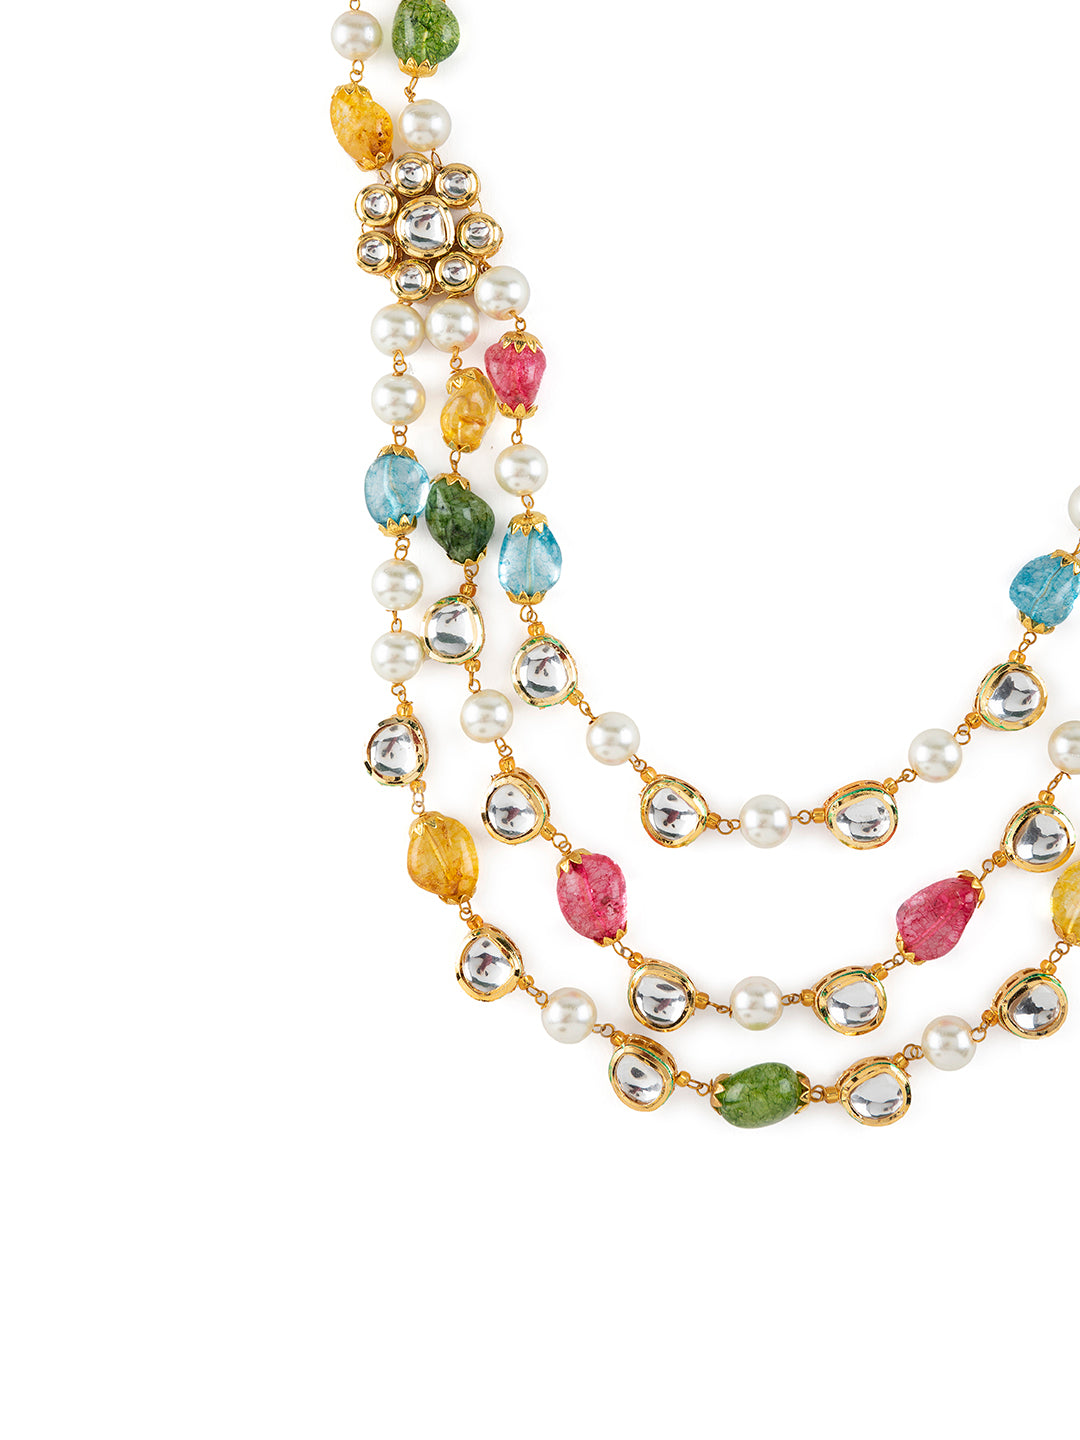 Priyaasi Multicolor Floral Pearl Beaded Layered Gold-Plated Jewellery Set